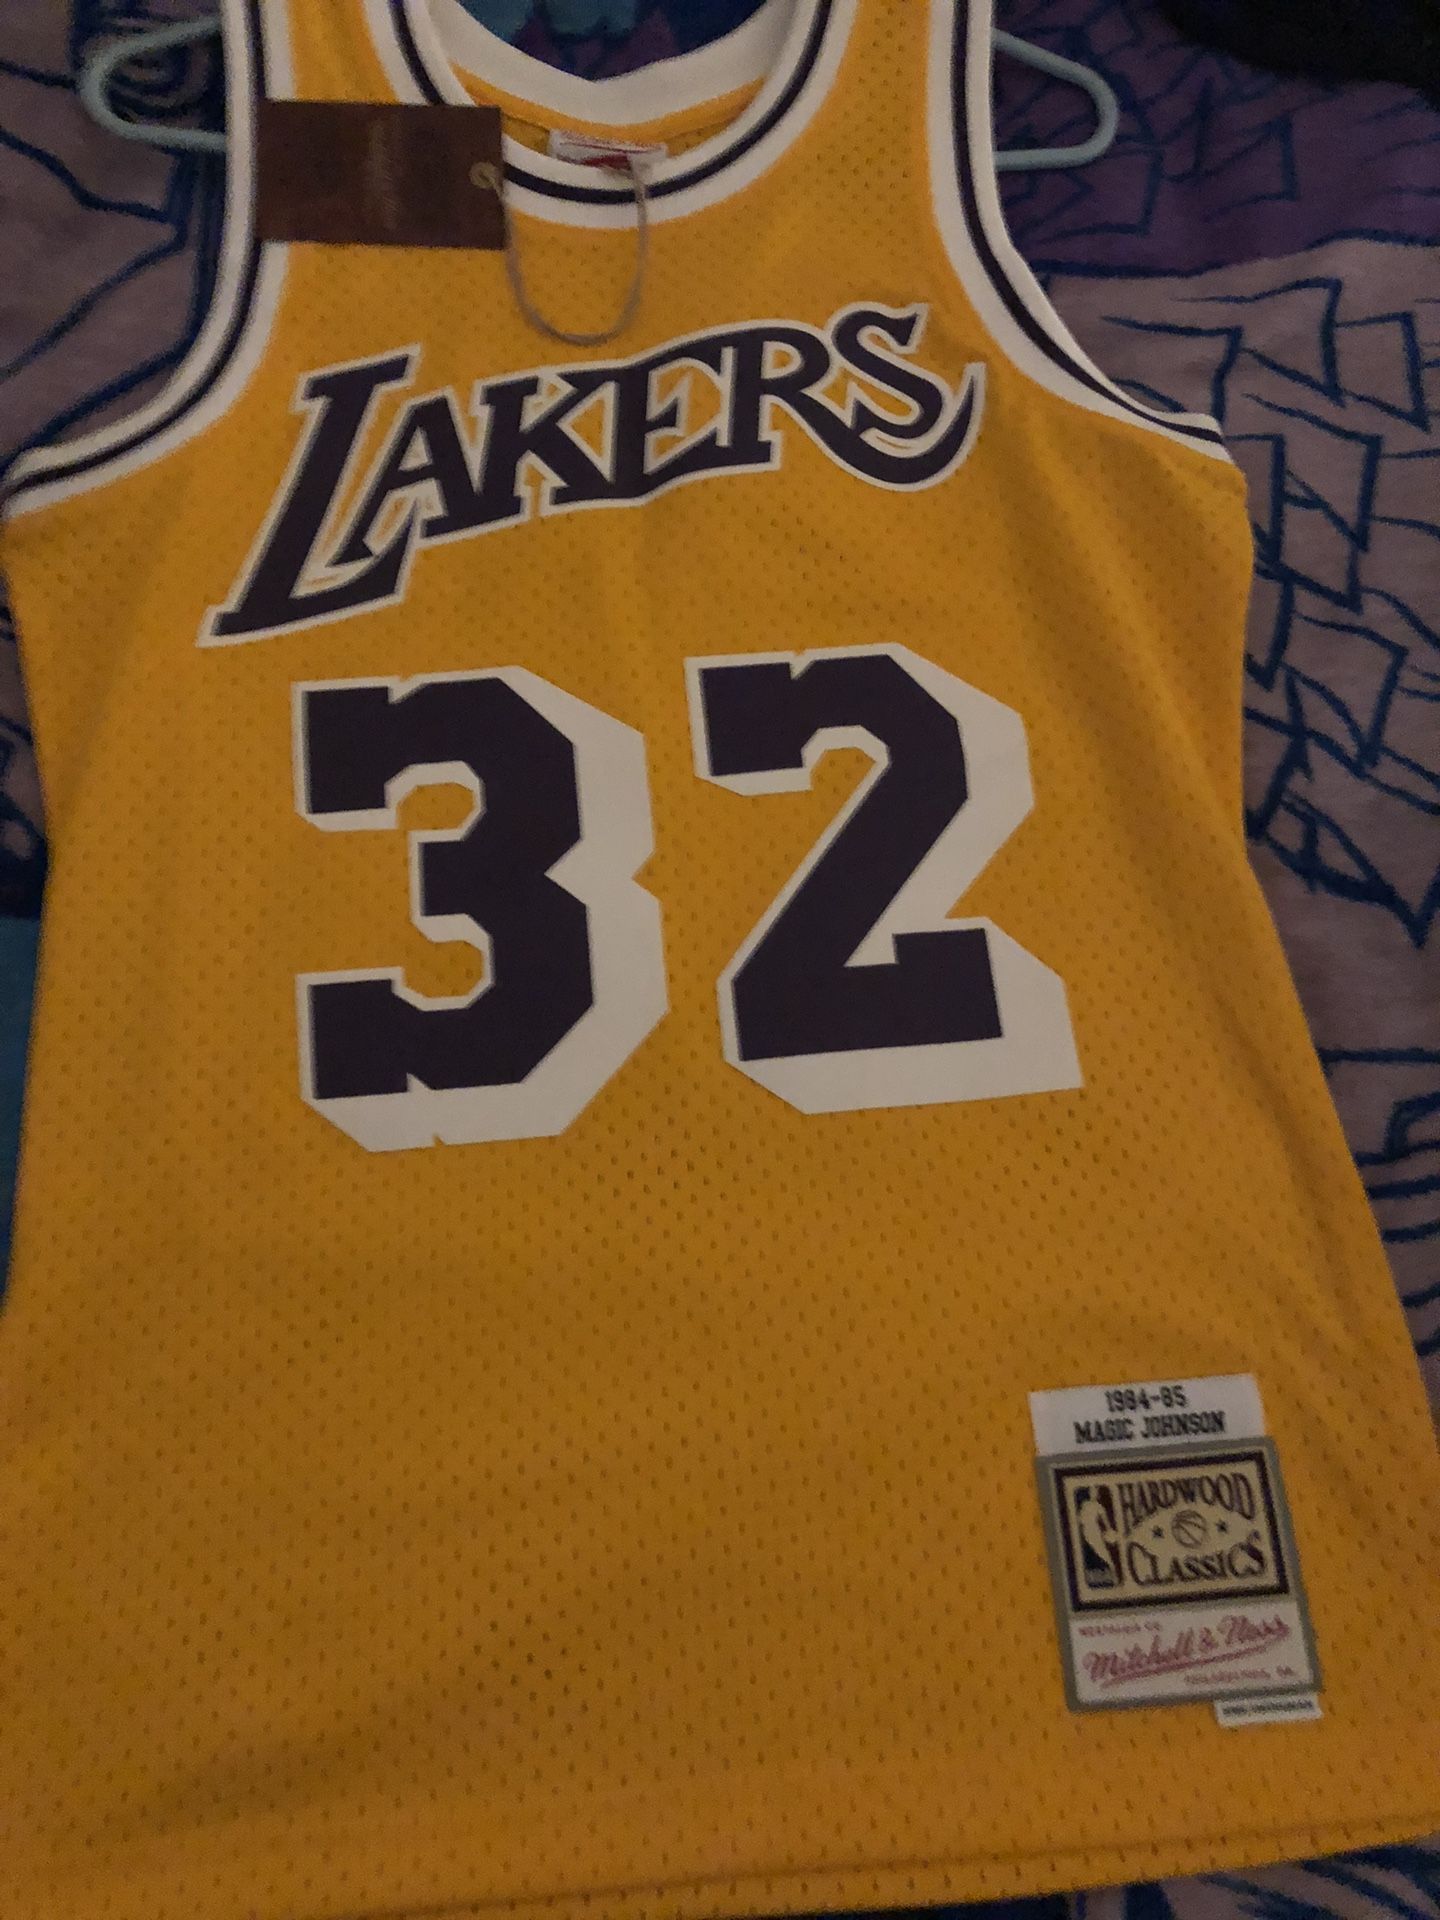 Lakers Jersey Never Worn 